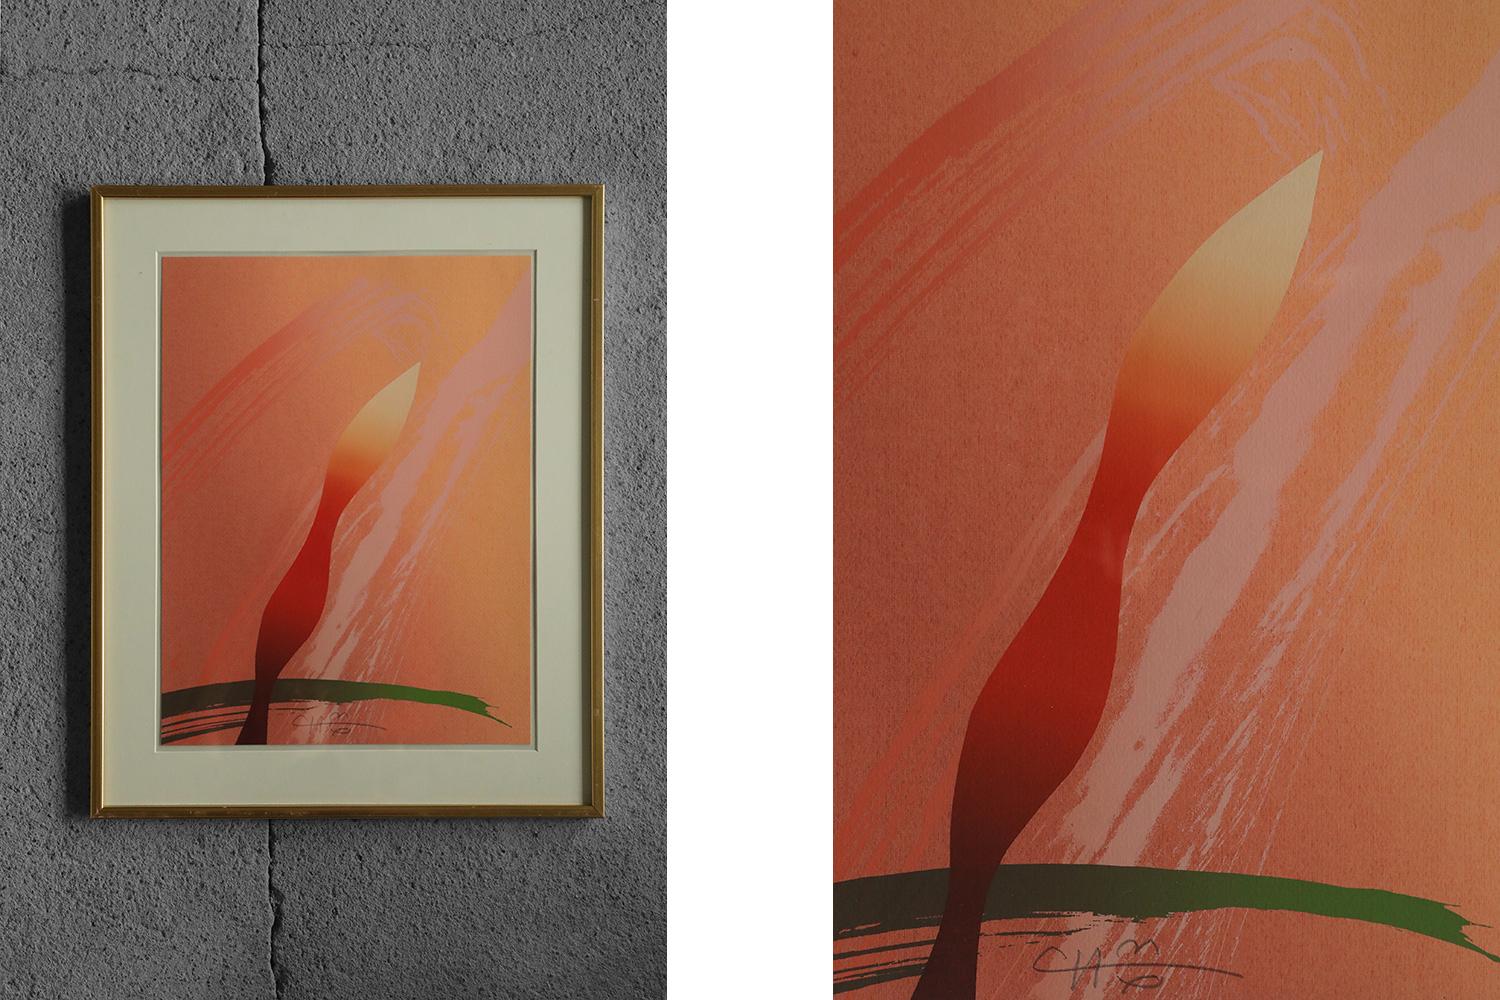 Curt Hillfon, Amaryllis, 1960s
Serigraphy
Work signed by the artist (pencil)
Work dimensions 52/42
Framed work

Curt Hillfon (1943 - 2018) was a painter, graphic artist and draftsman. He grew up in Stockholm but from the 1960s he created in